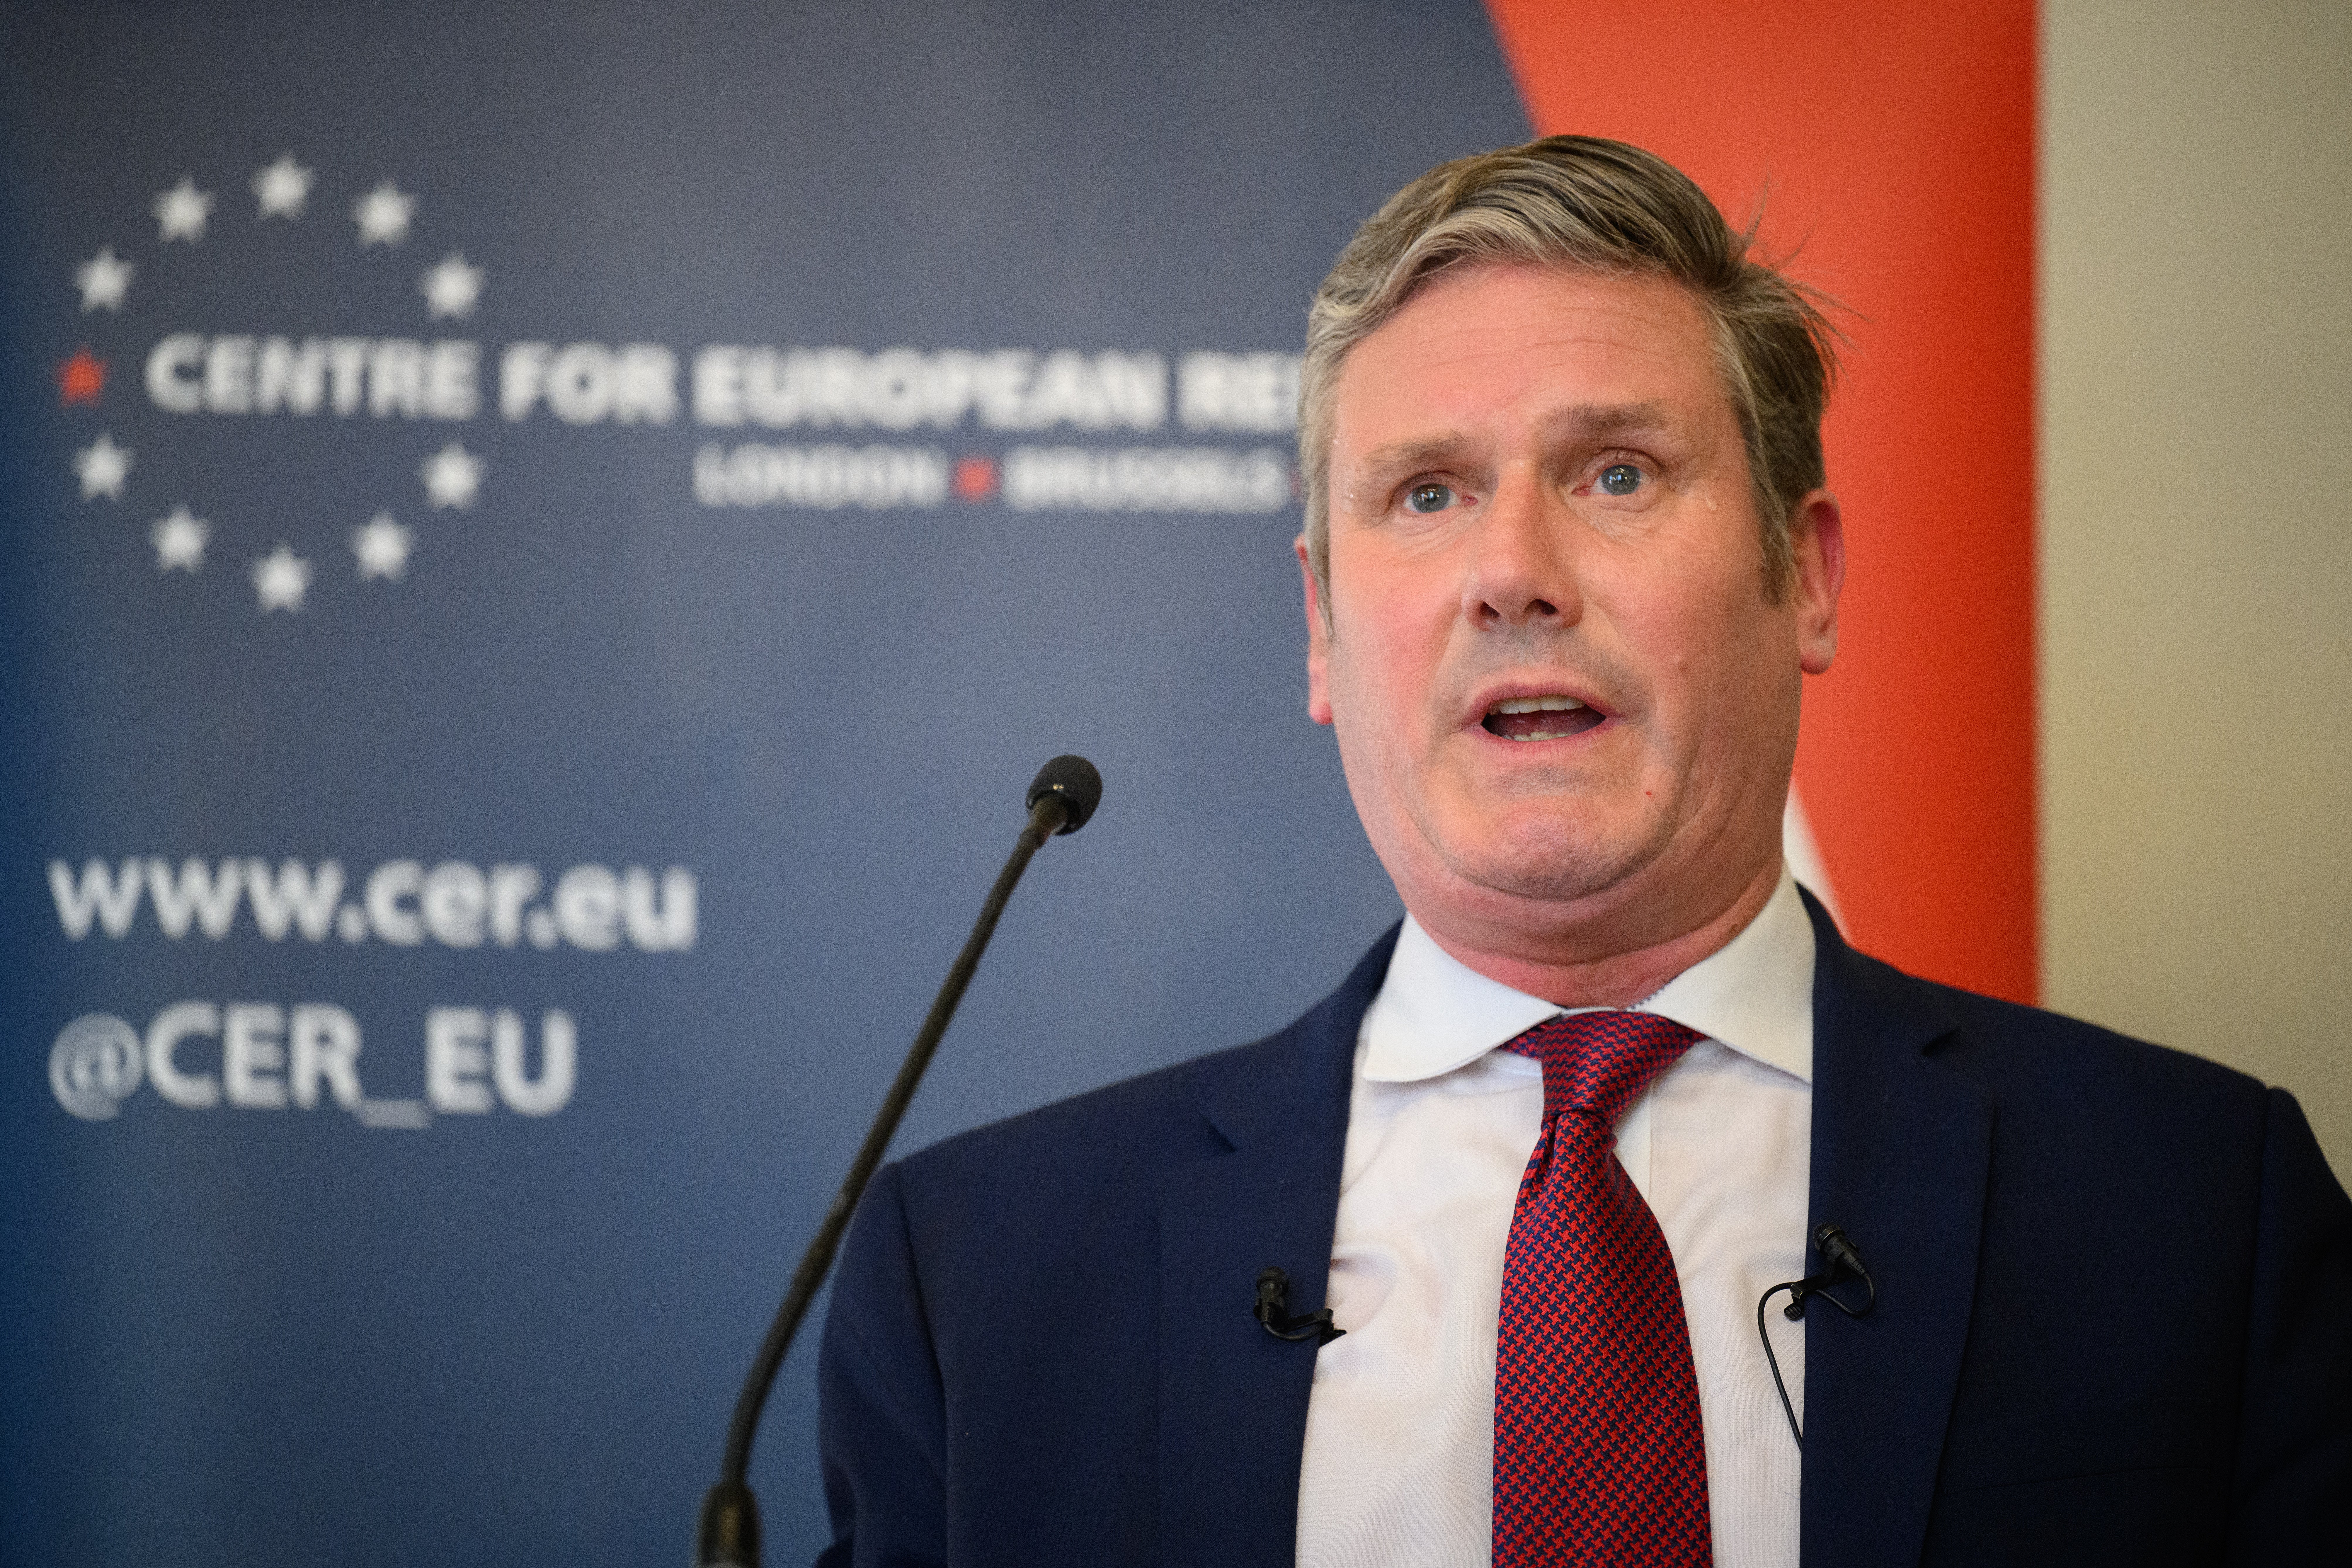 Keir Starmer said he ‘couldn’t disagree more’ with those who wish to reverse Brexit